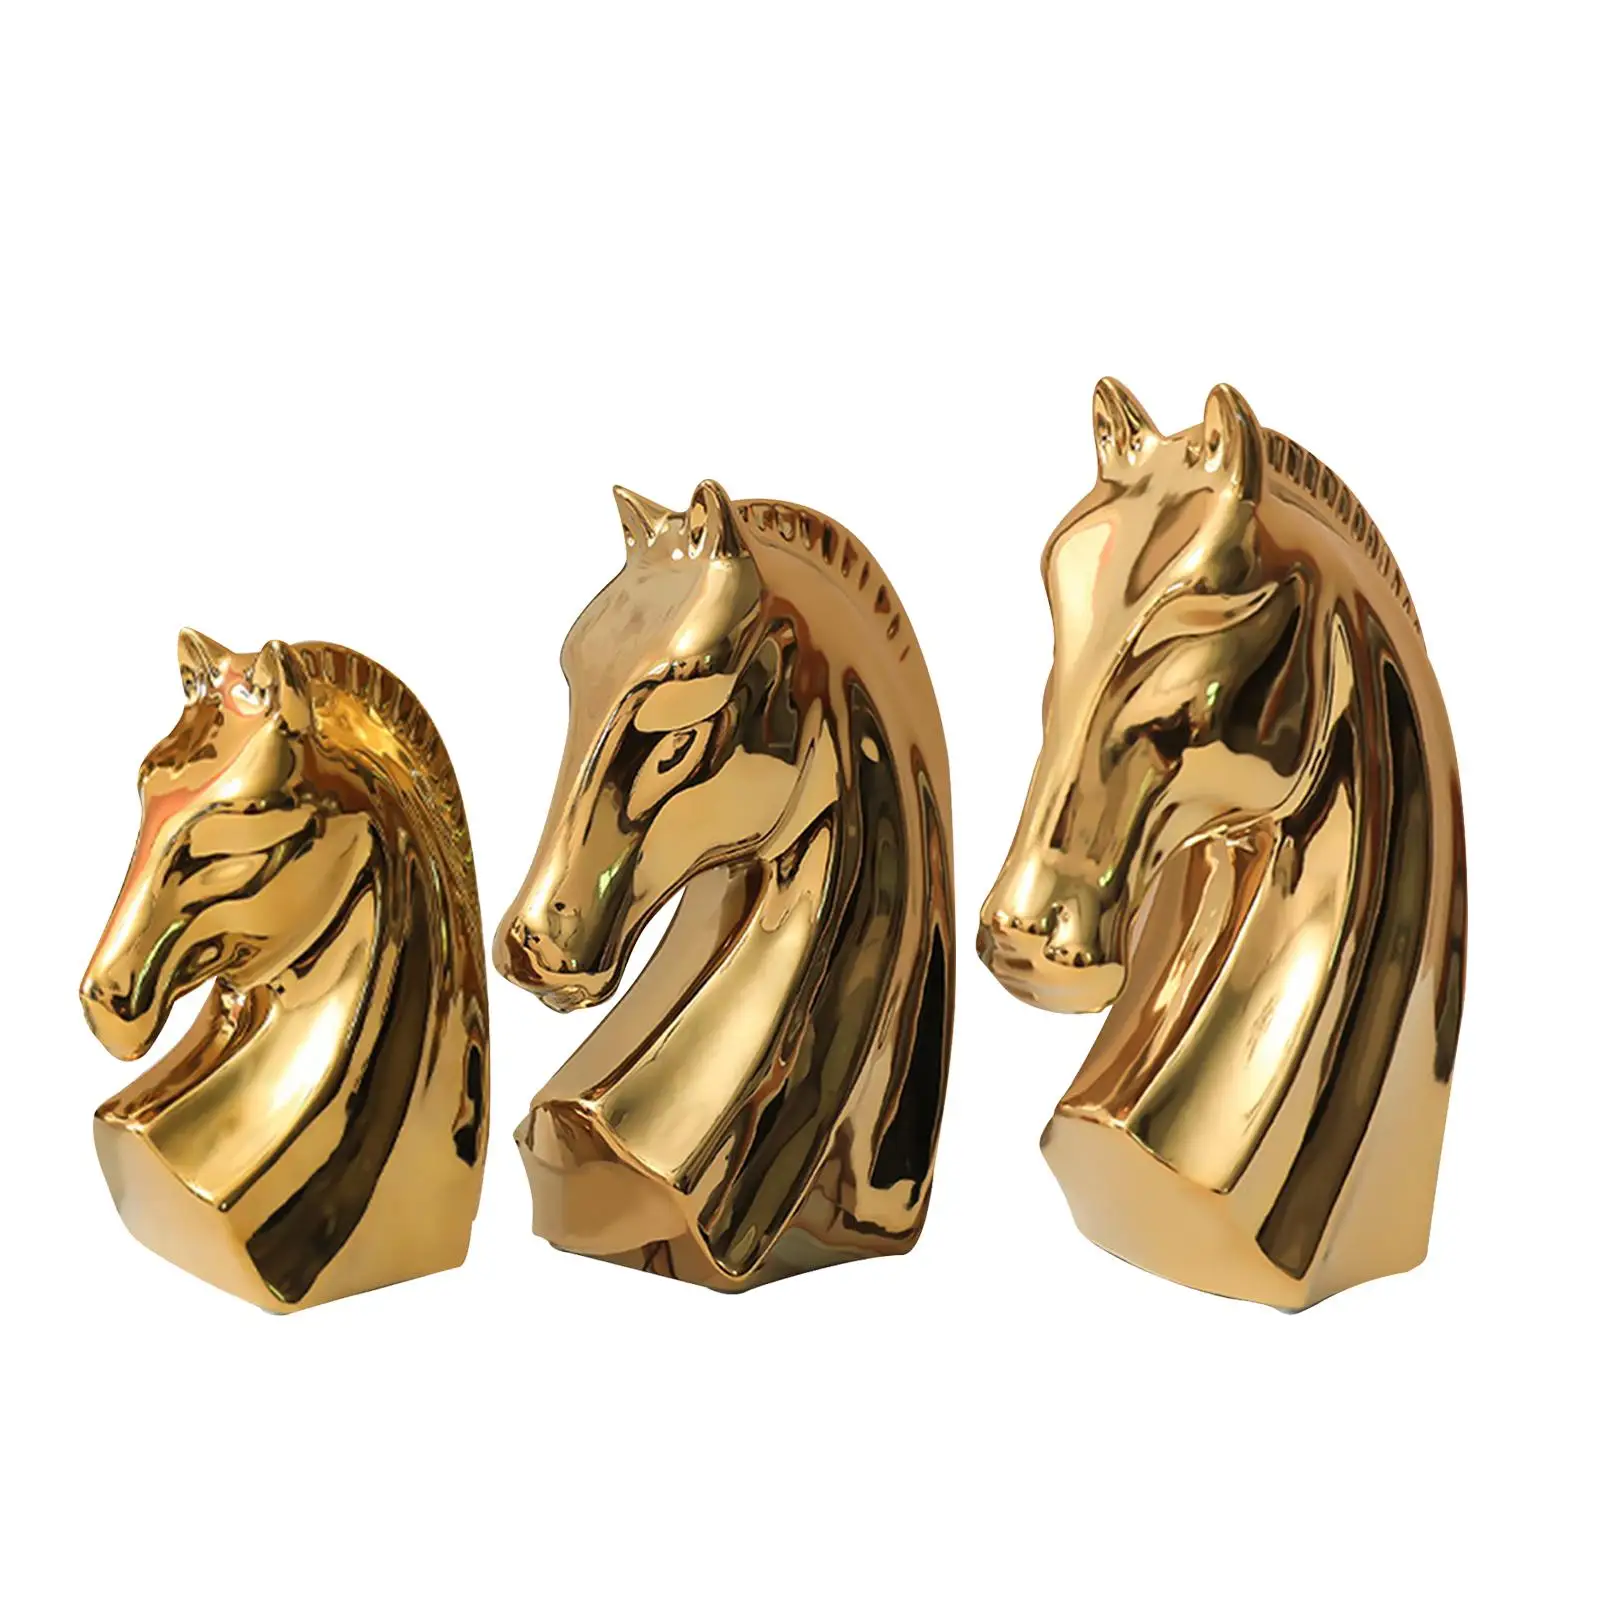 Ceramic Horse Statue Animal Statue Figurine Crafts for Home Office Bedroom Decoration Ornament